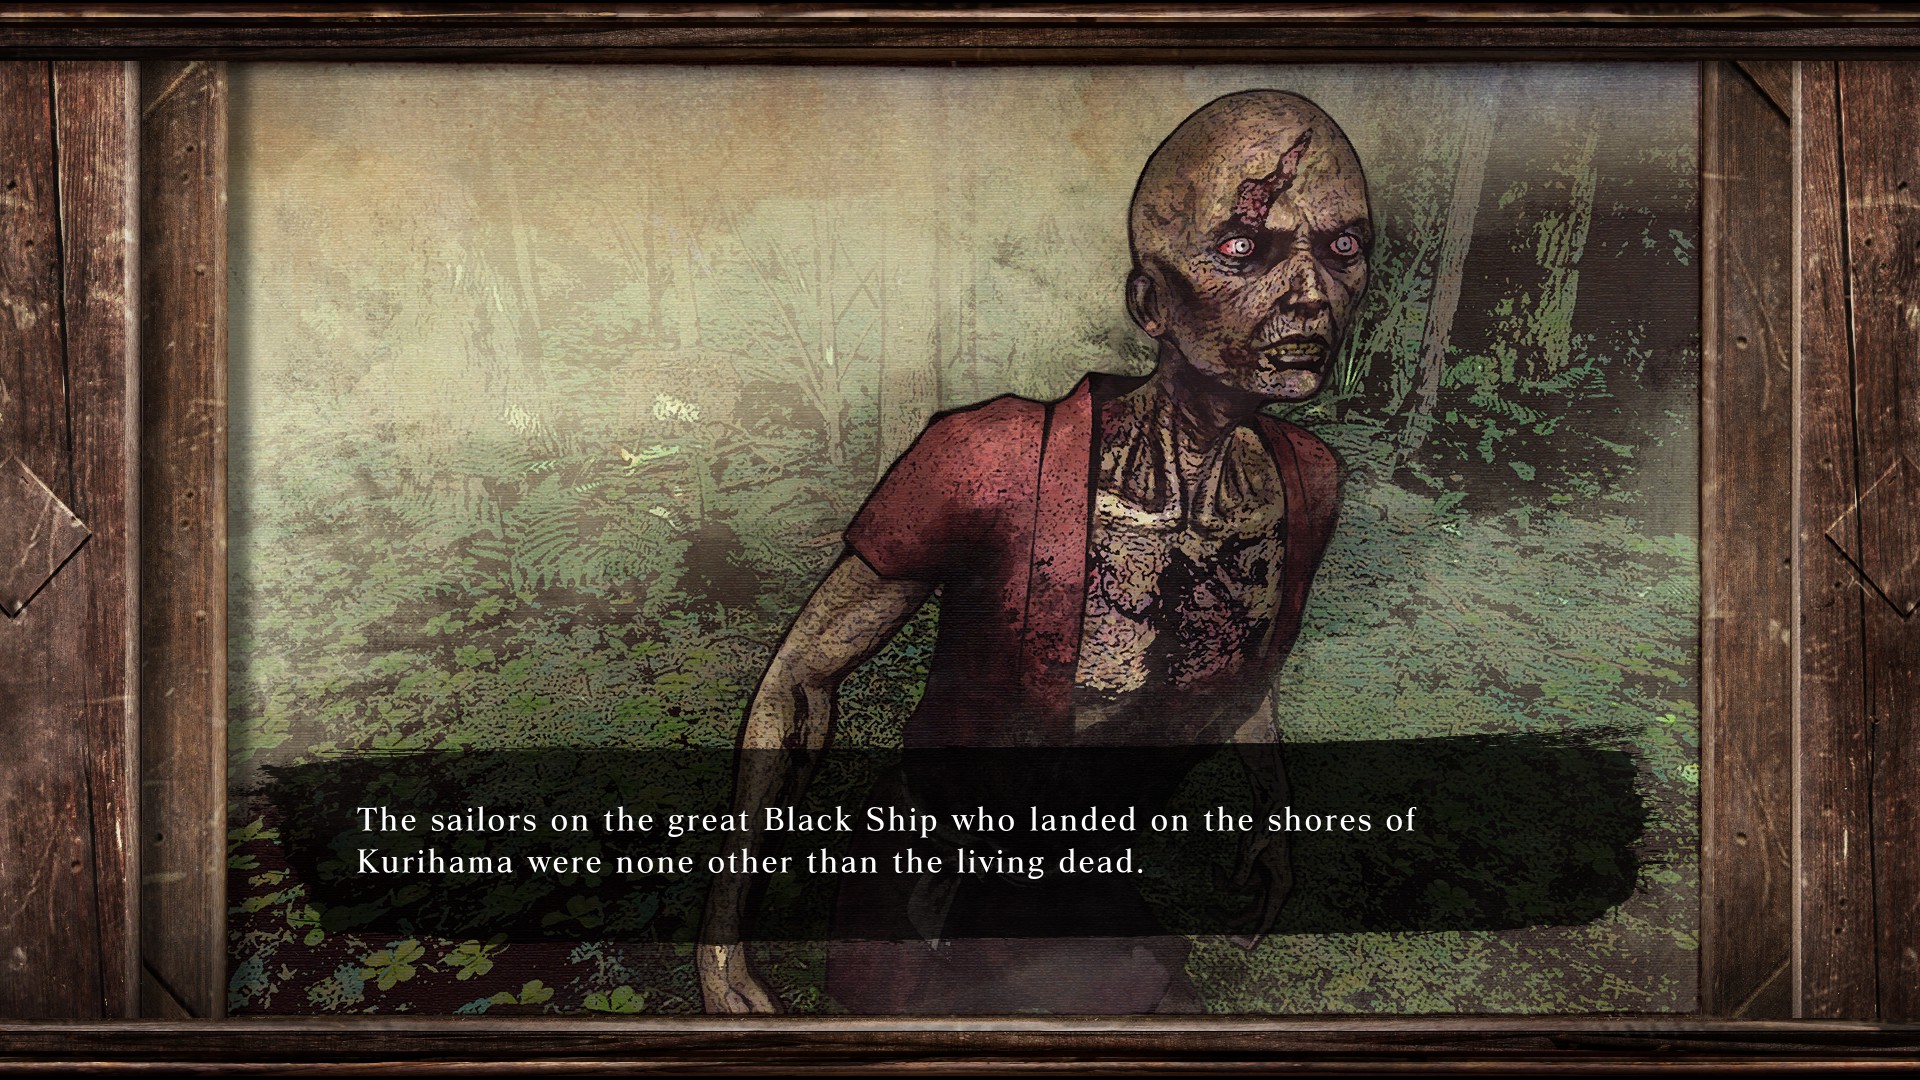 A screenshot from Ed-0 Zombie Uprising highlighting the narrative.